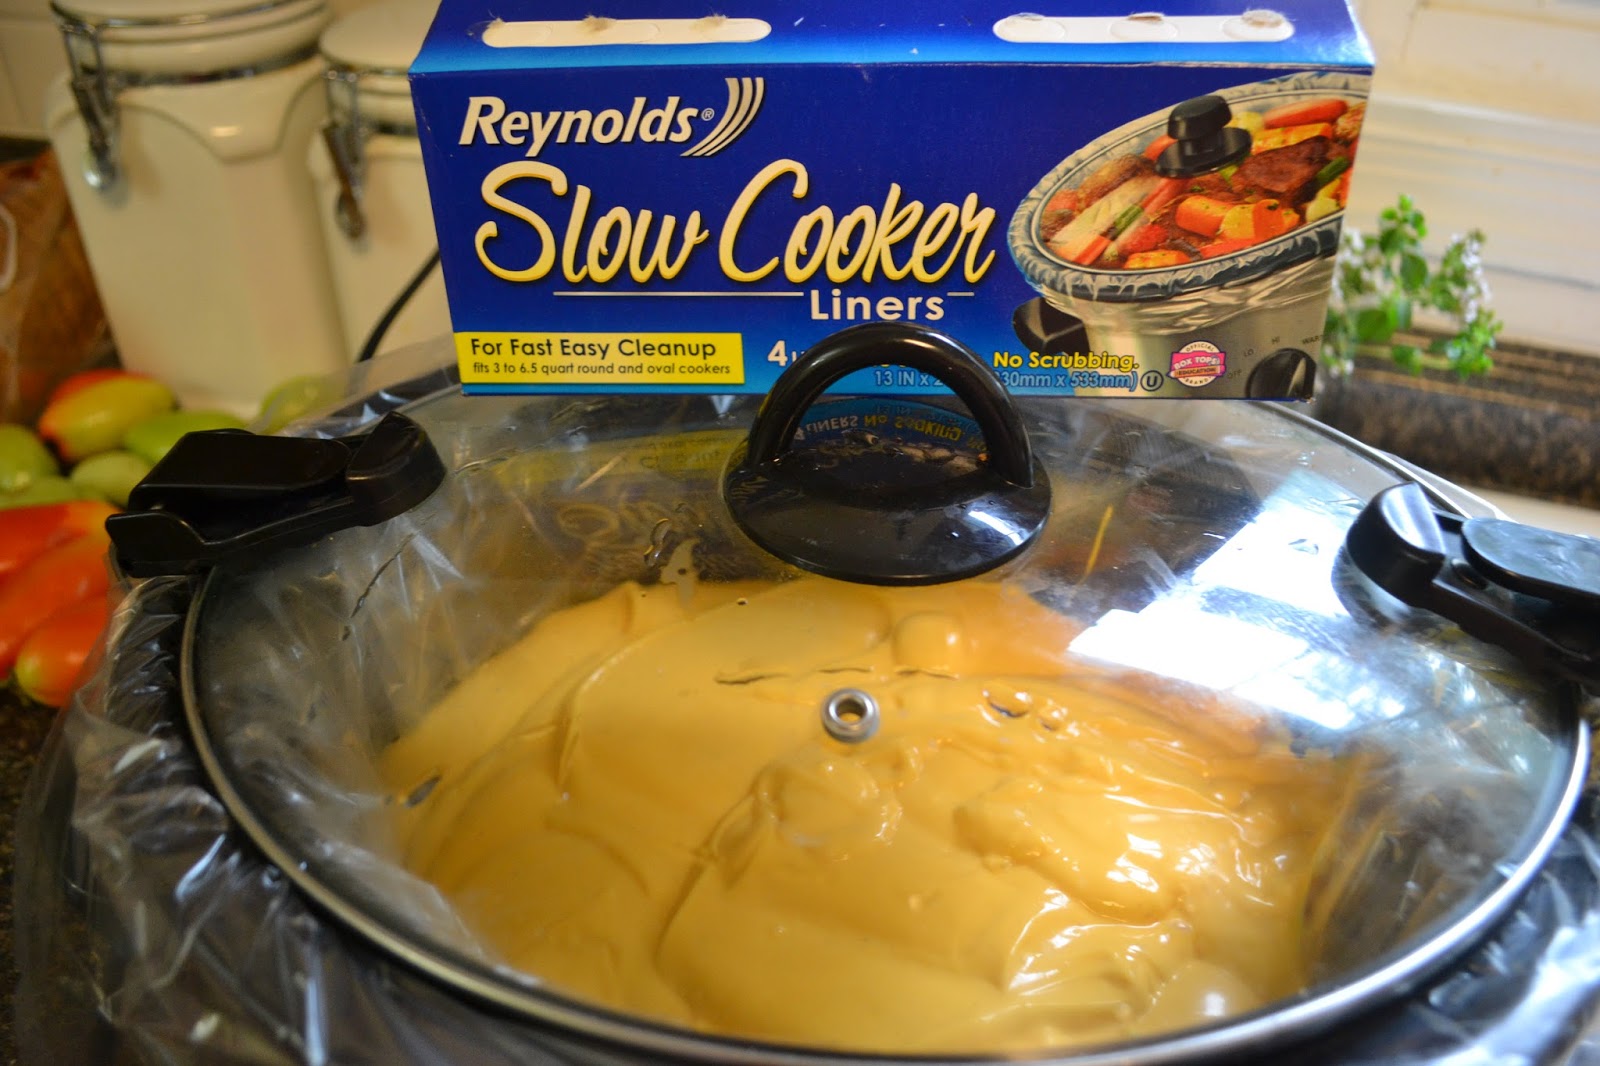 Controversial Cooking Opinions - - - Reynolds Slow Cooker Liners 4, For Fast Easy Cleanup fits 3 to 6.5 quart round and oval cookers No Scrubbing 130mm x 533mm O Box To 13 Inx Ari Unilo